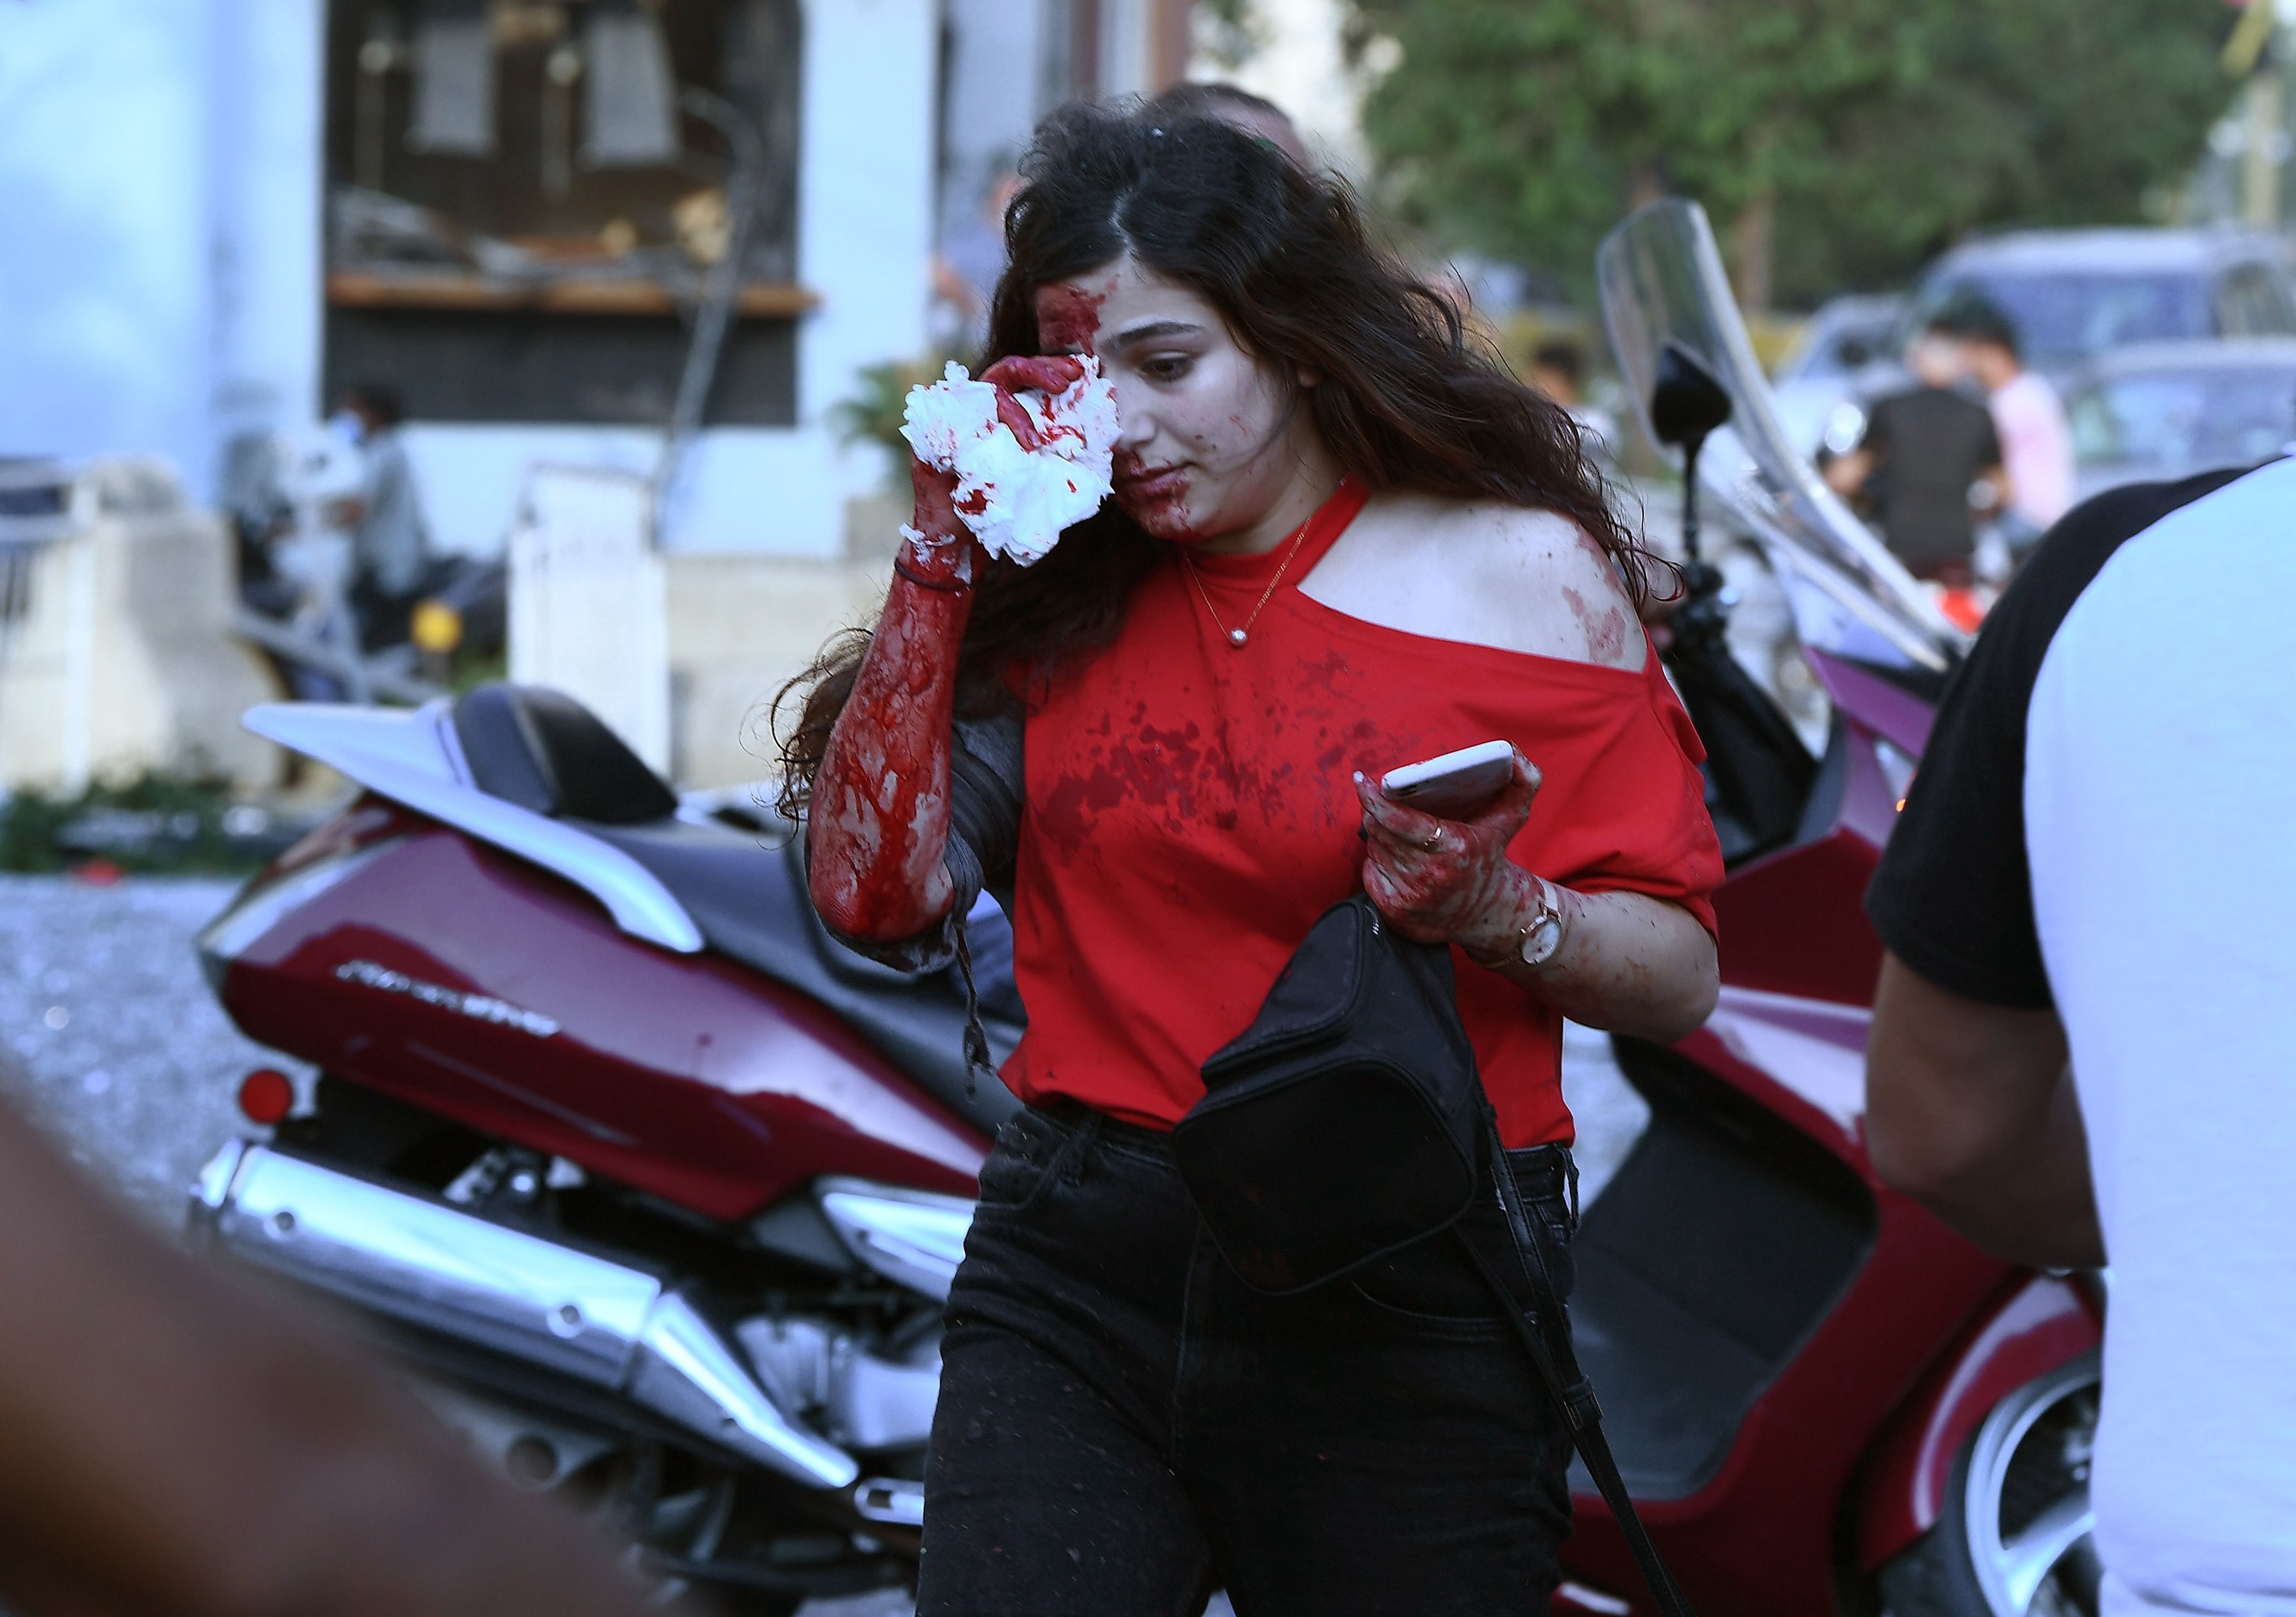 A woman in a red shirt covers her eye, her face, shirt, and arm covered in blood as she walks down the street